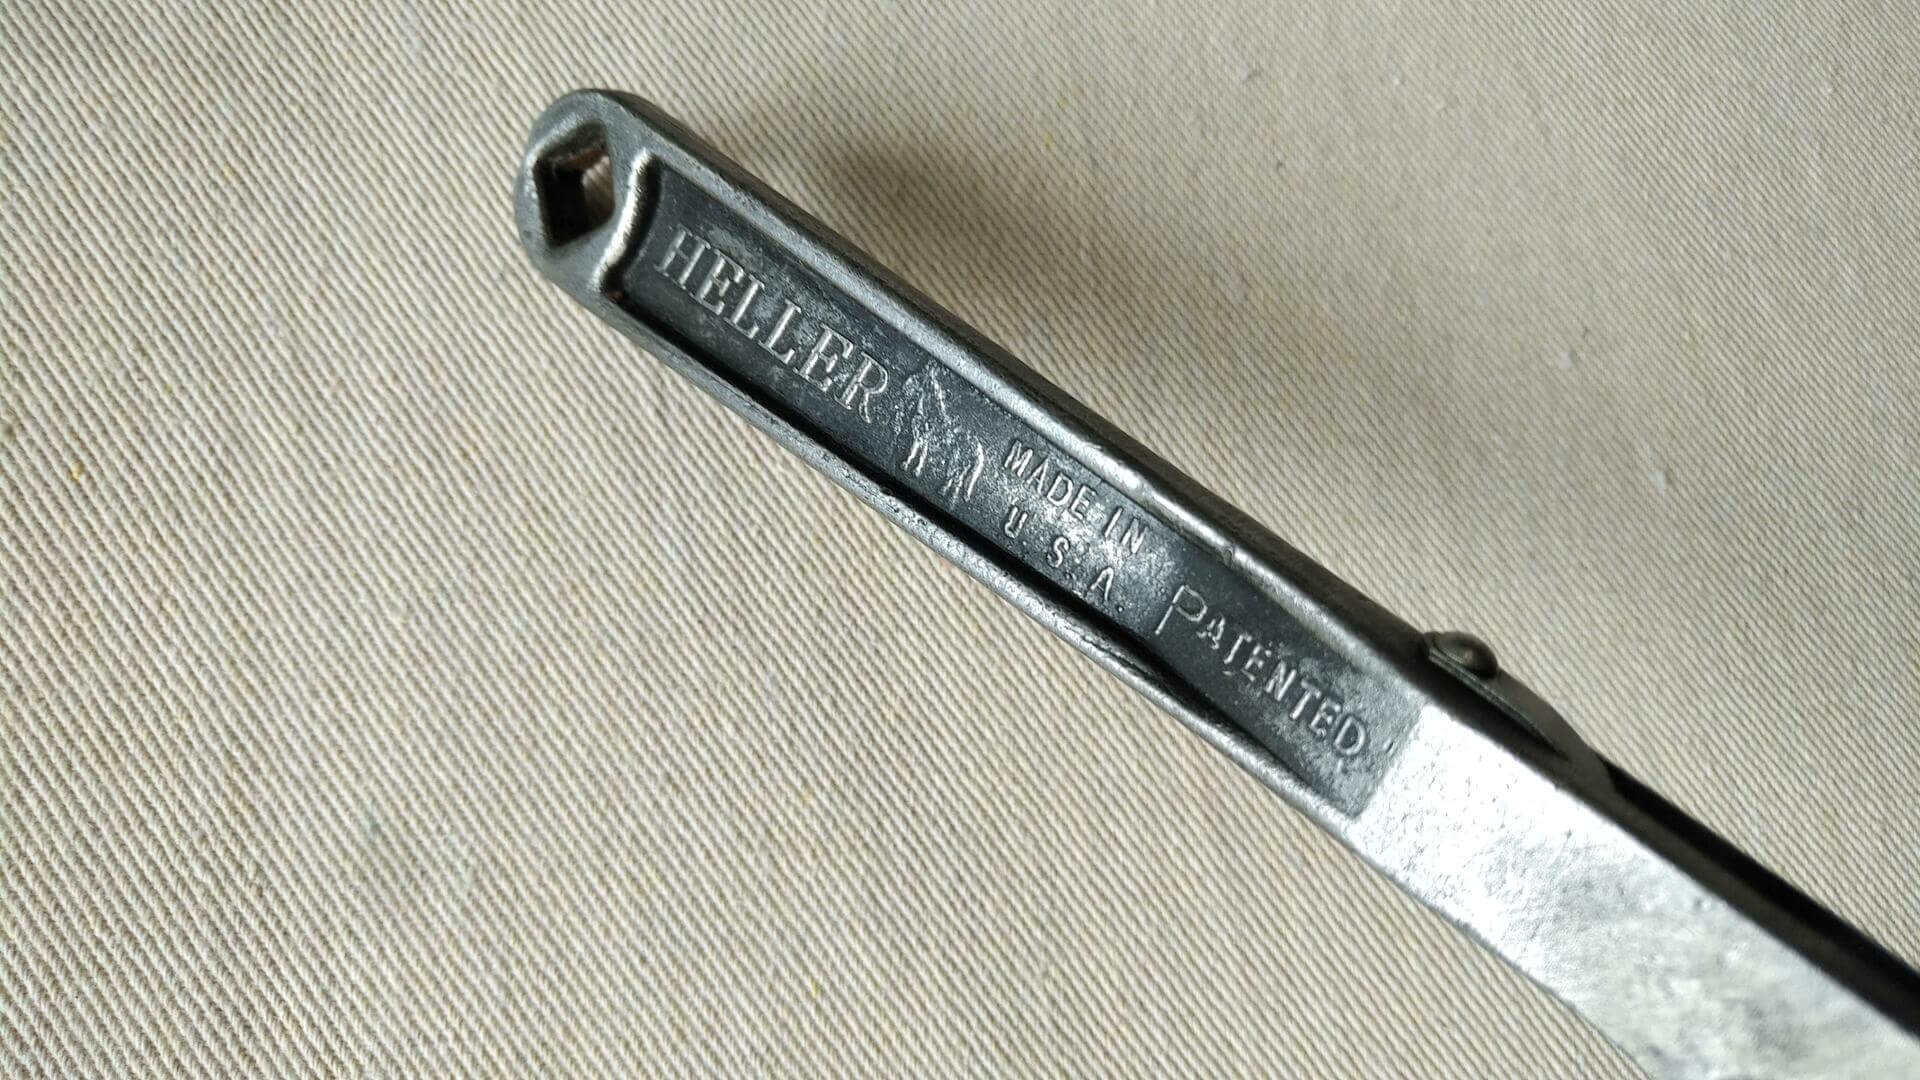 Nice vintage Heller Brothers 8 inch adjustable Masterench double jaw wrench. Antique made in USA collectible automotive and plumbing gripping hand tools